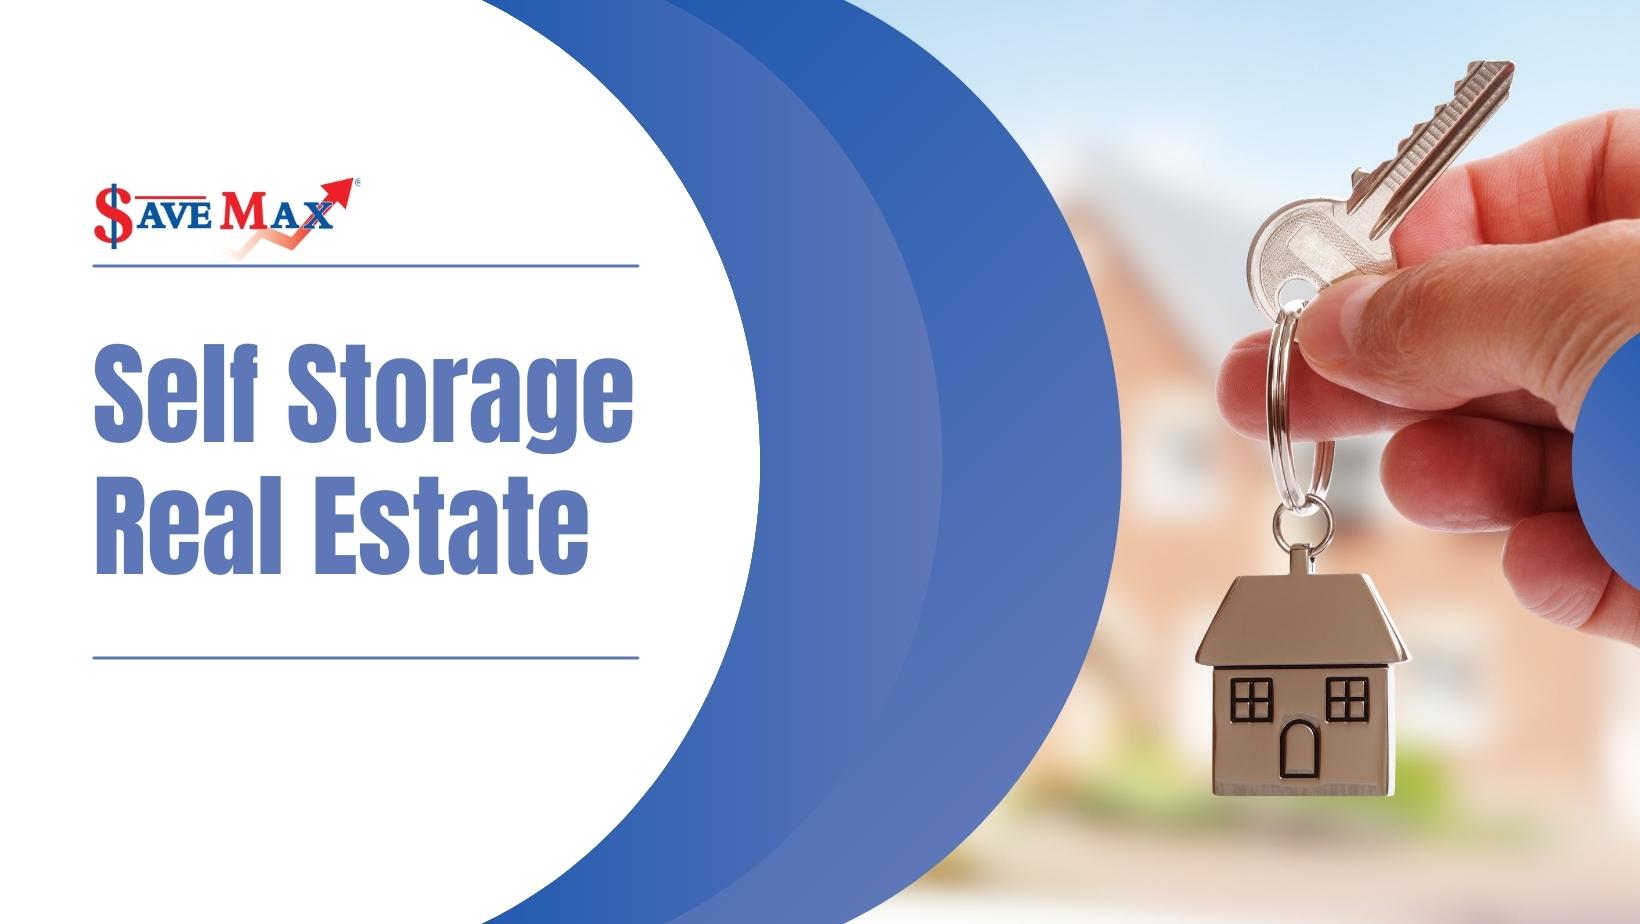 Self-storage Real Estate - Why Should You Invest in it?